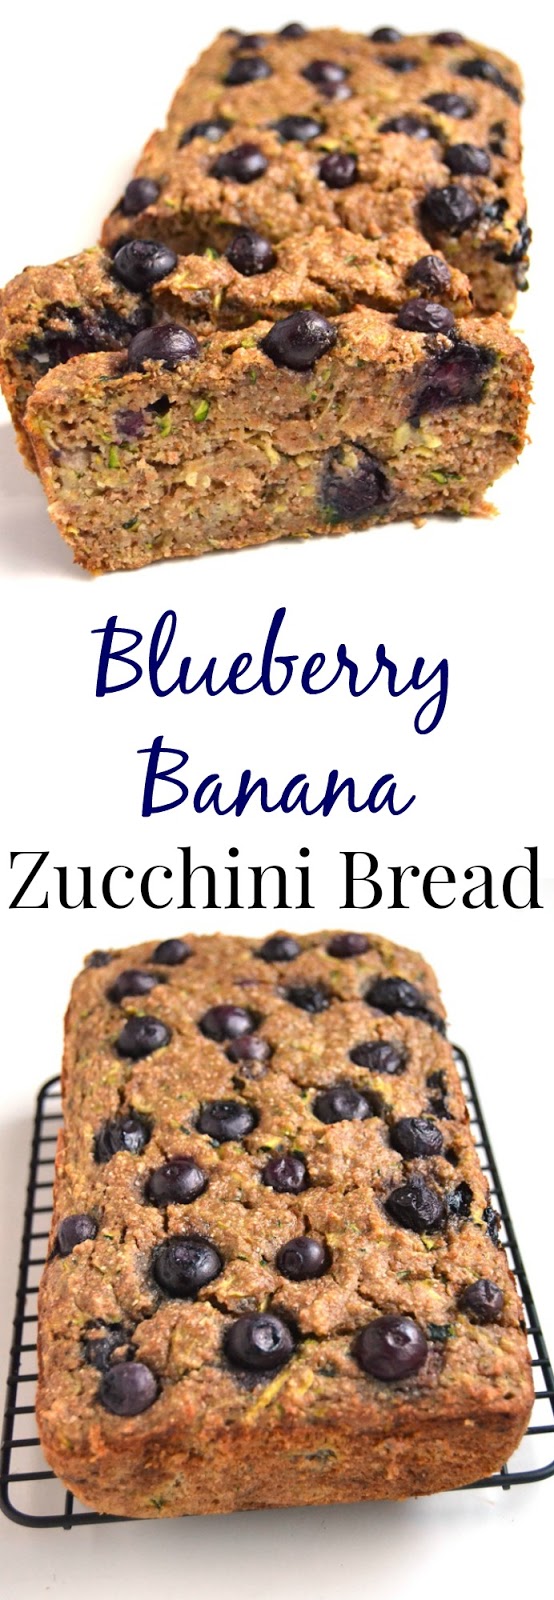 Blueberry Banana Zucchini Bread is a moist and healthy bread made with whole-wheat flour and the season's best blueberries and zucchini. www.nutritionistreviews.com